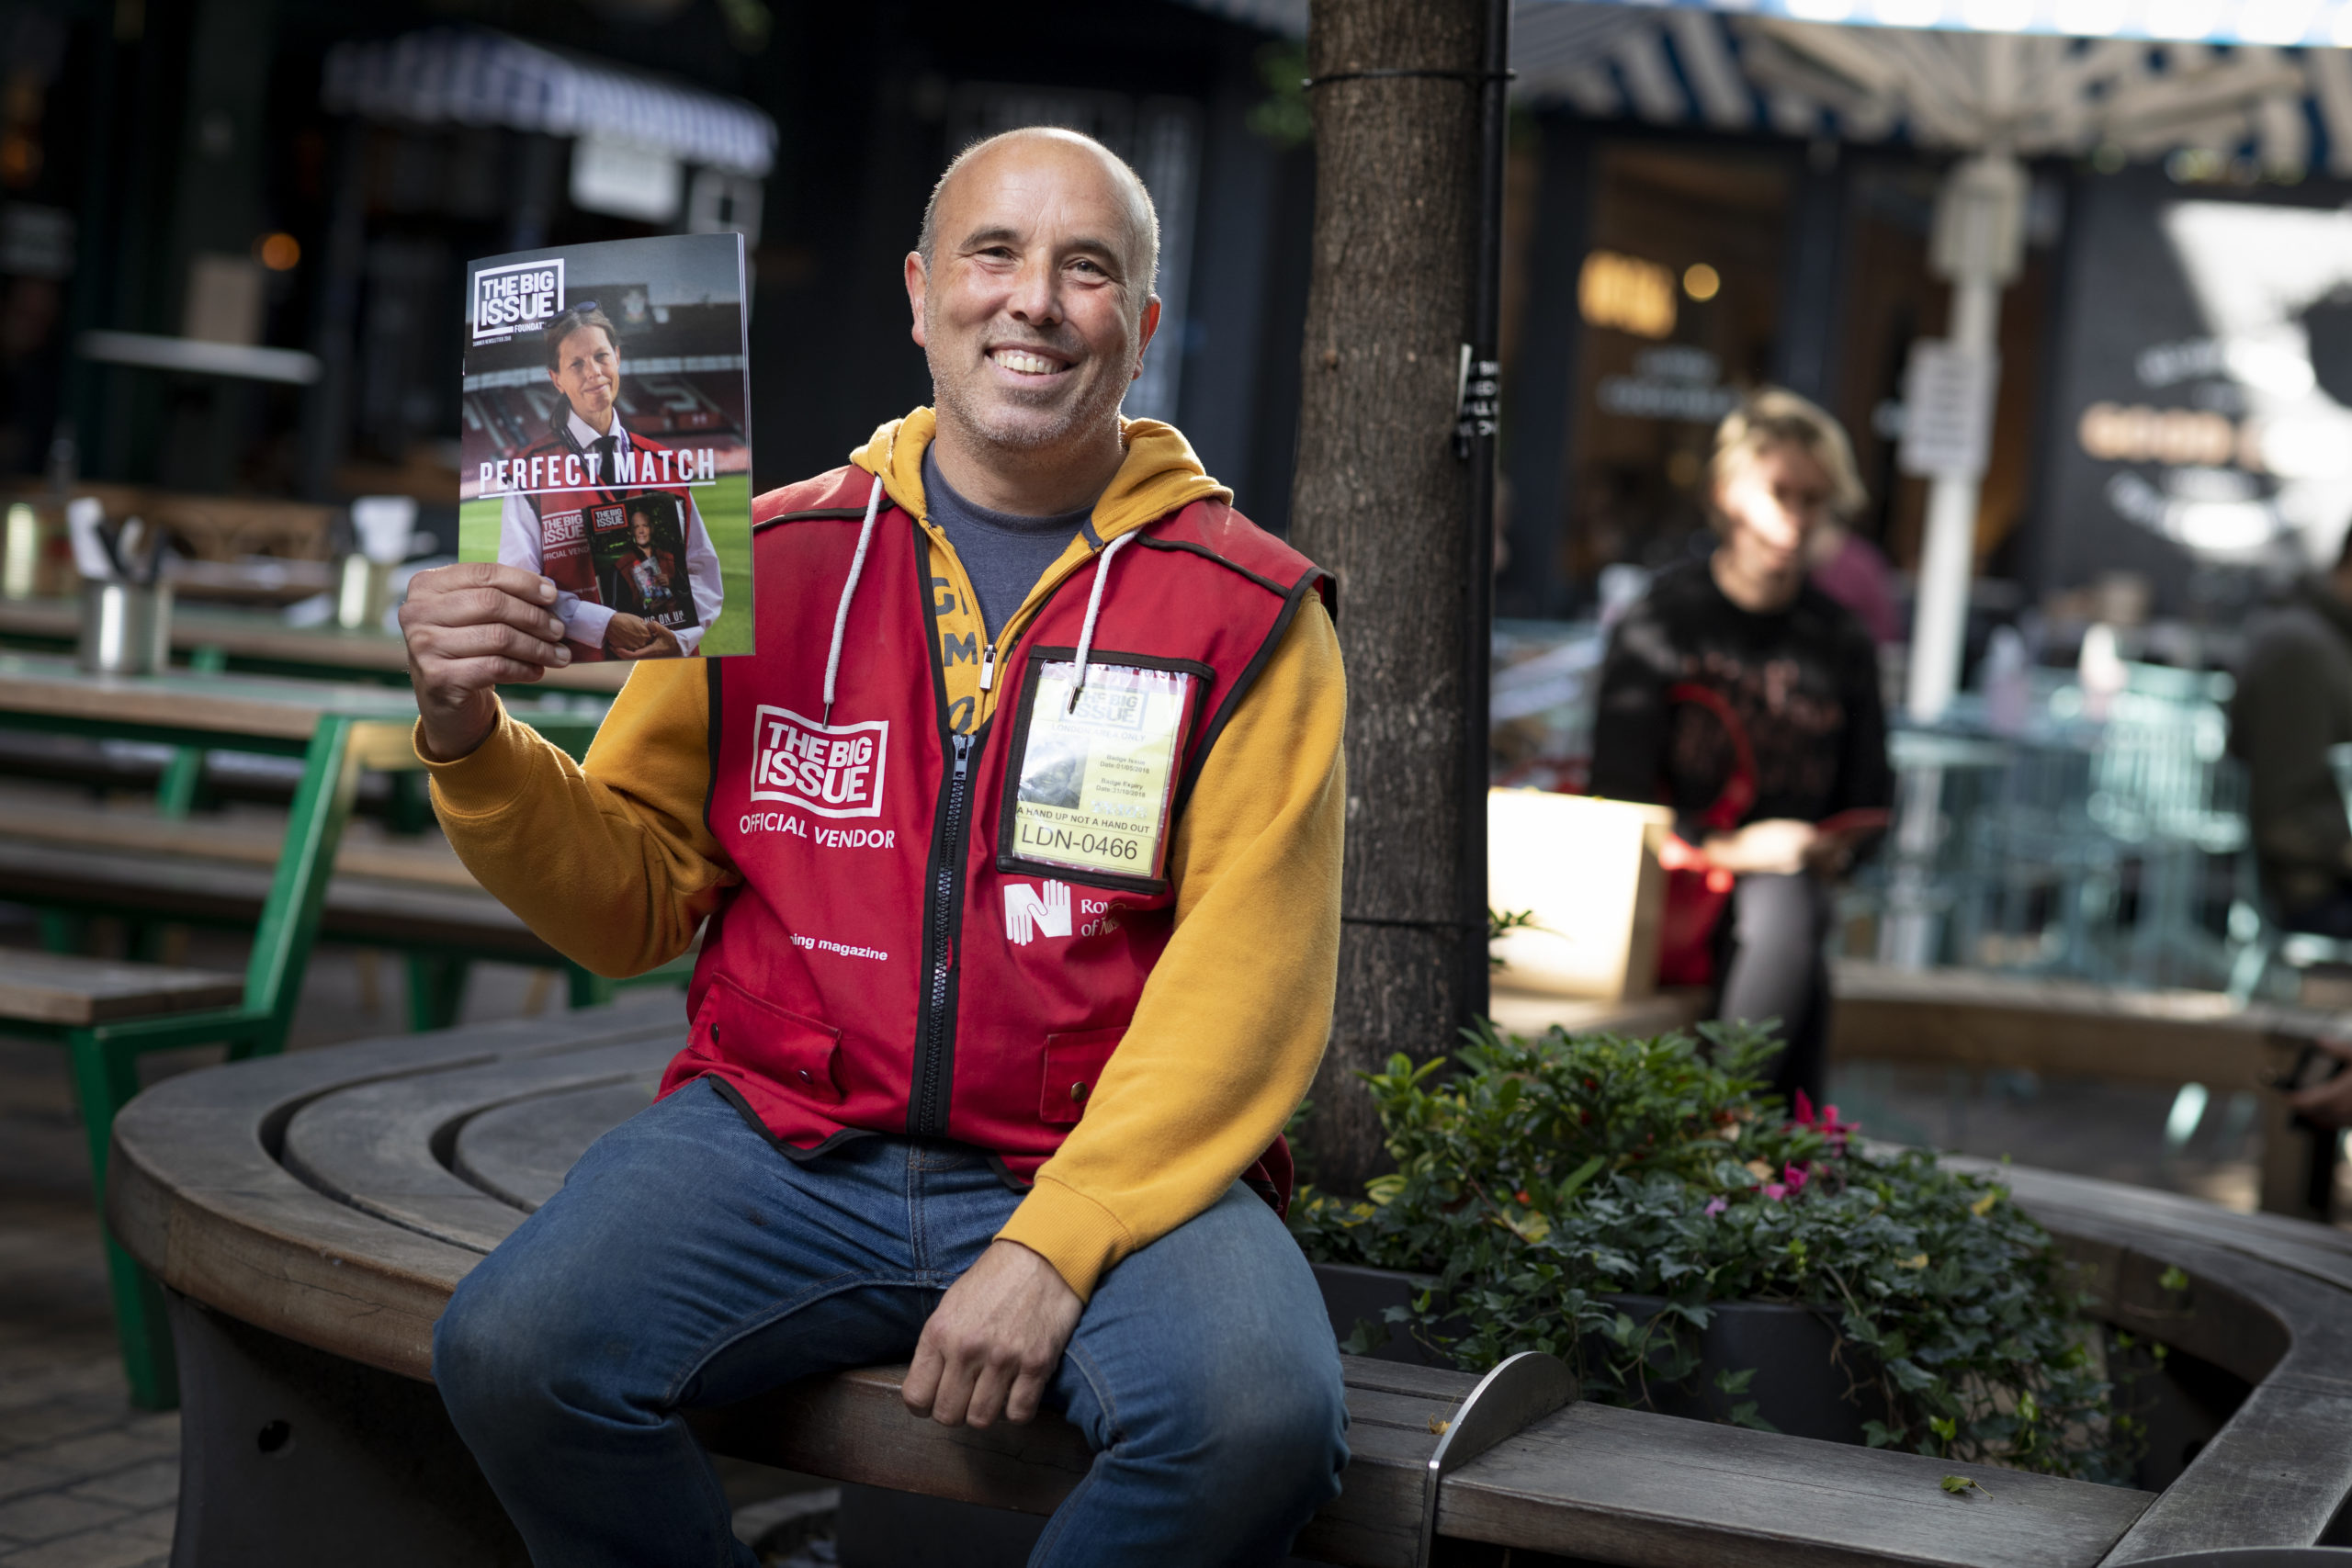 Big Issue vendor holding up issue of magazine, asking for regular donations to The Big Issue Foundation.